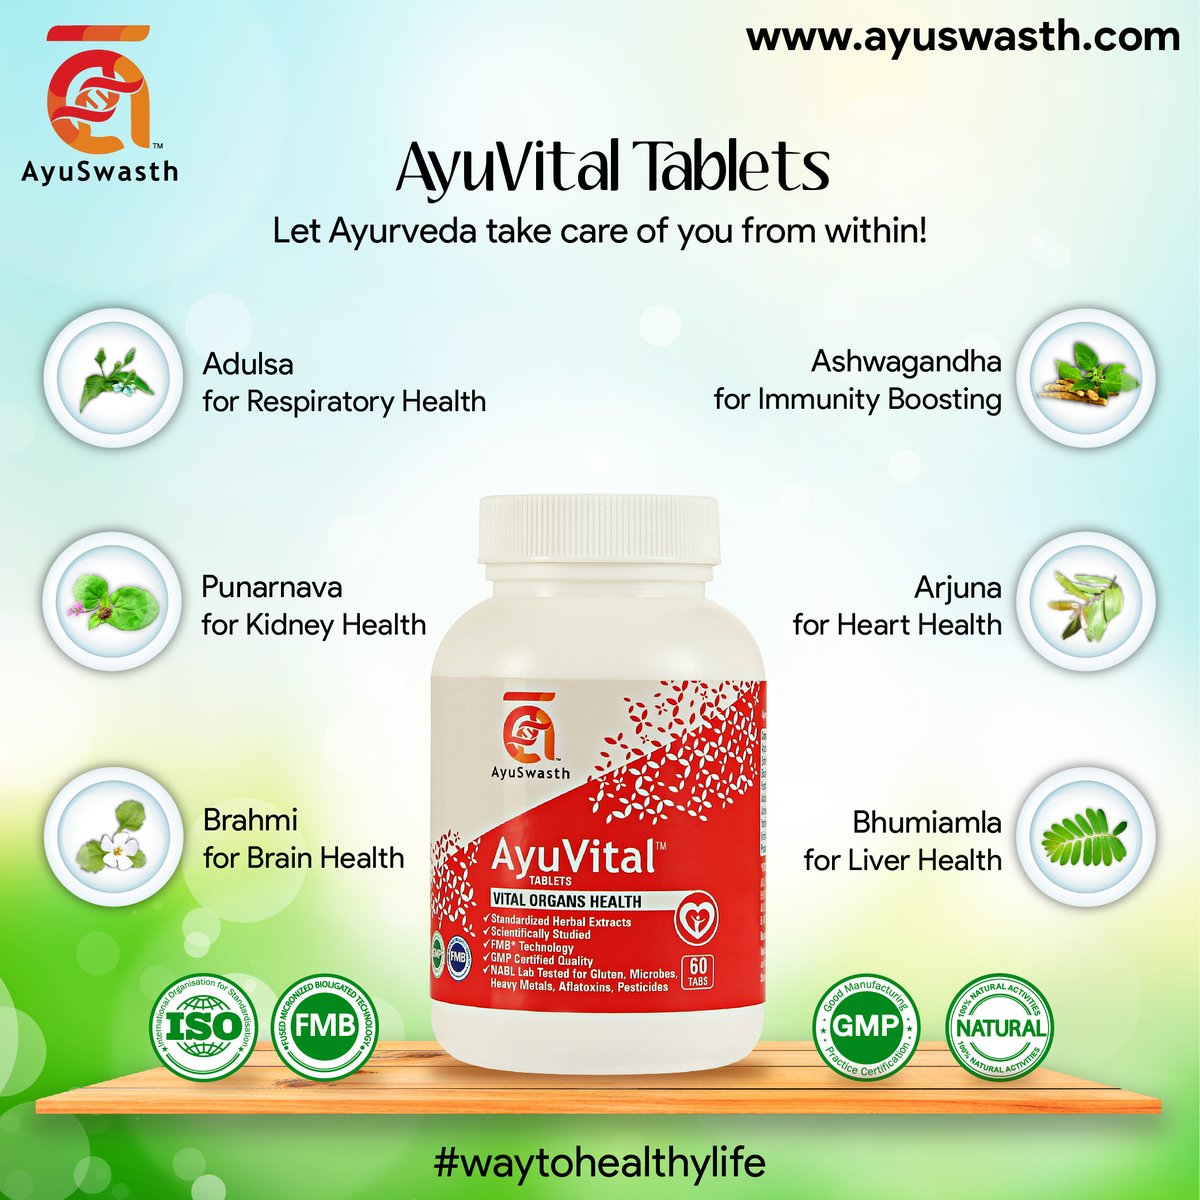 Let Aurveda take care of you within!
ayuswasth.com
#ayuswasth #AyurvedicTablets #ayurvedichealth #womenshealth #ayurveda #healthproducts #ayurvedichealth #ayurveda #herbalhealthcare #herbalhealth #ayurvedicproducts #stayFIT